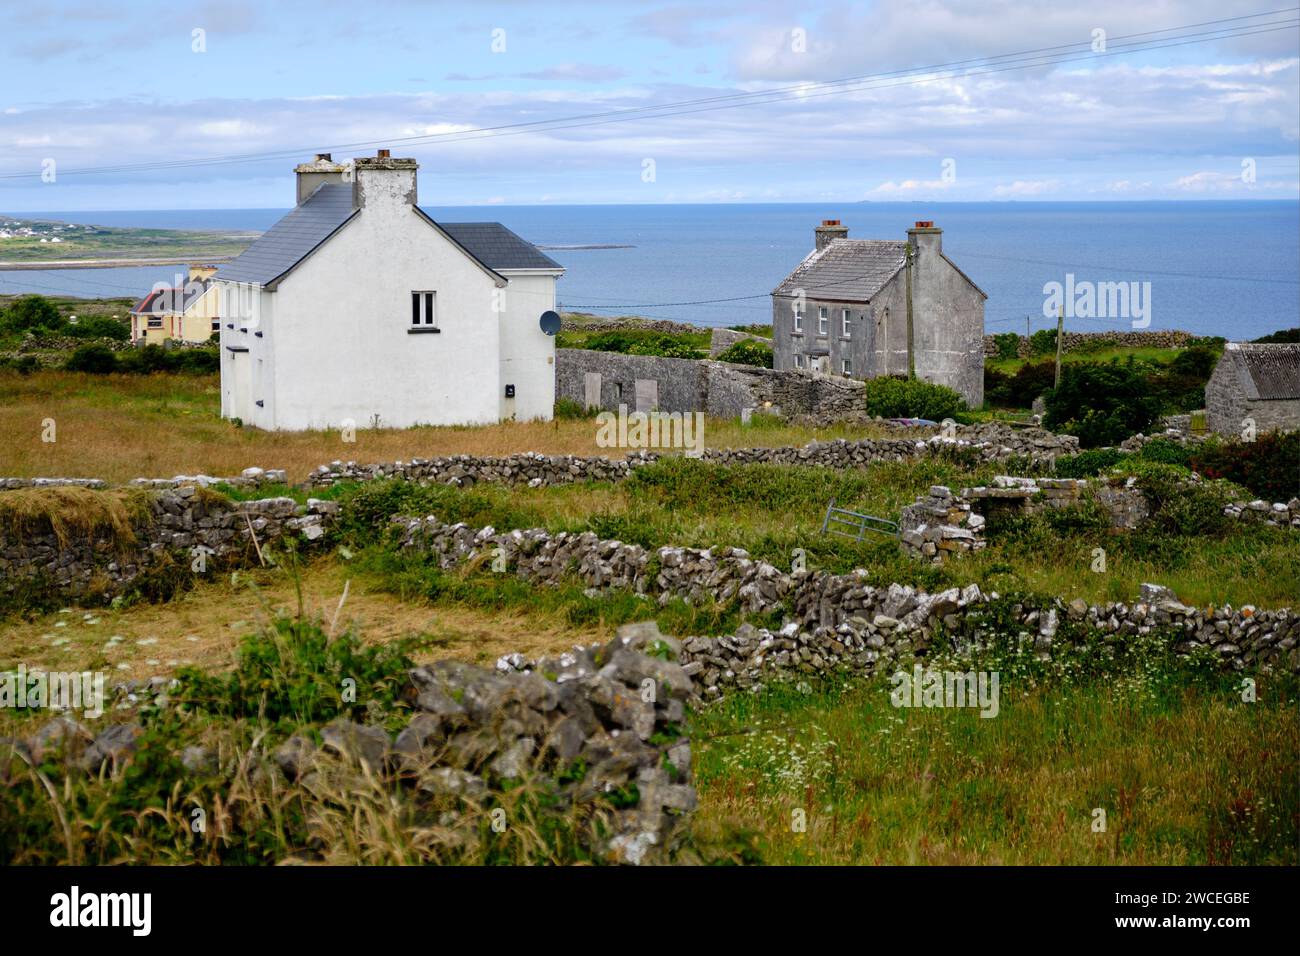 Irish country side scenery, with rock fences, little houses and ocean in background on Inishmore island Stock Photo